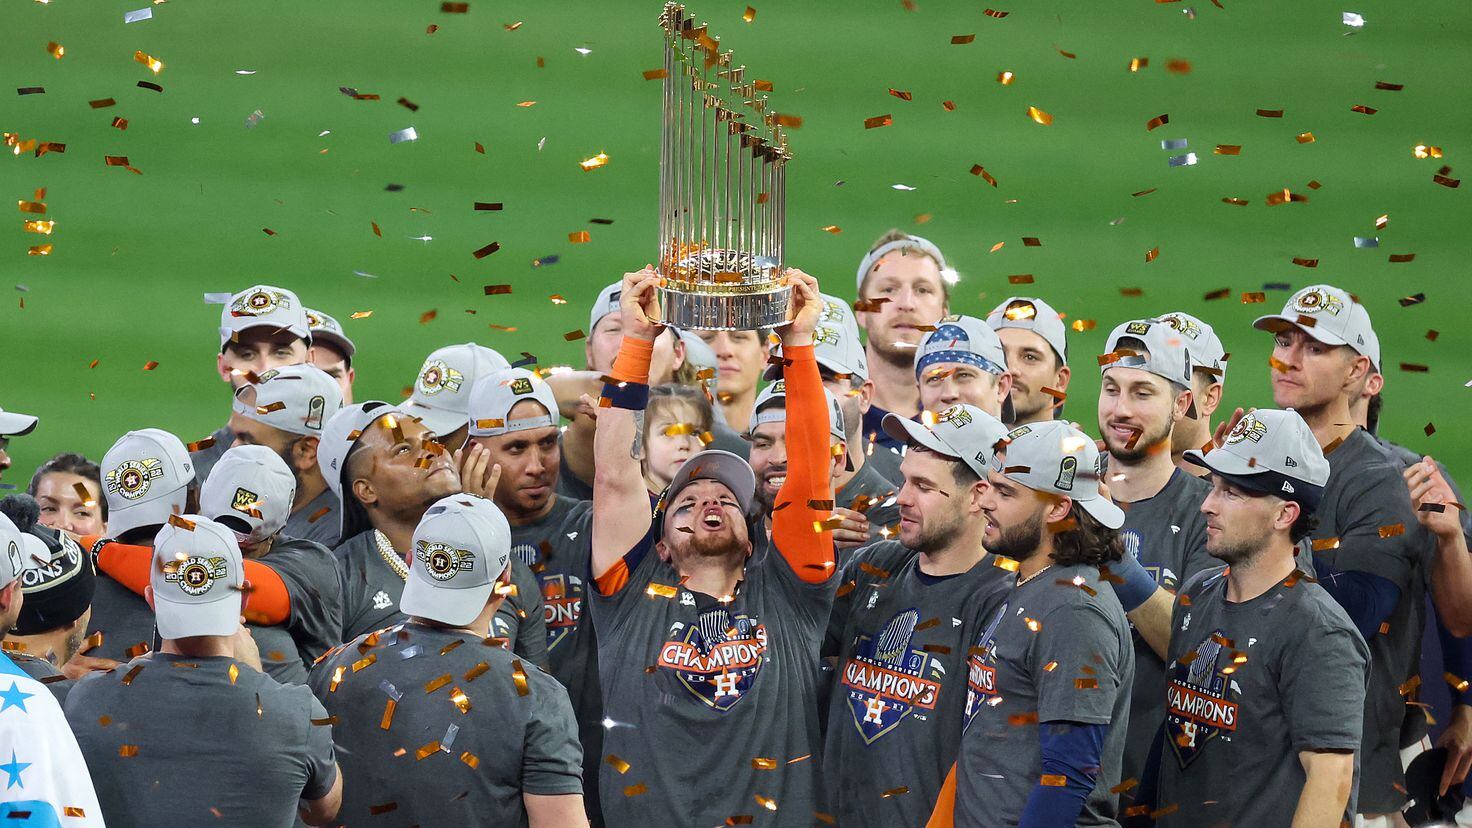 The Red Sox won the World Series—here's how much money they'll earn